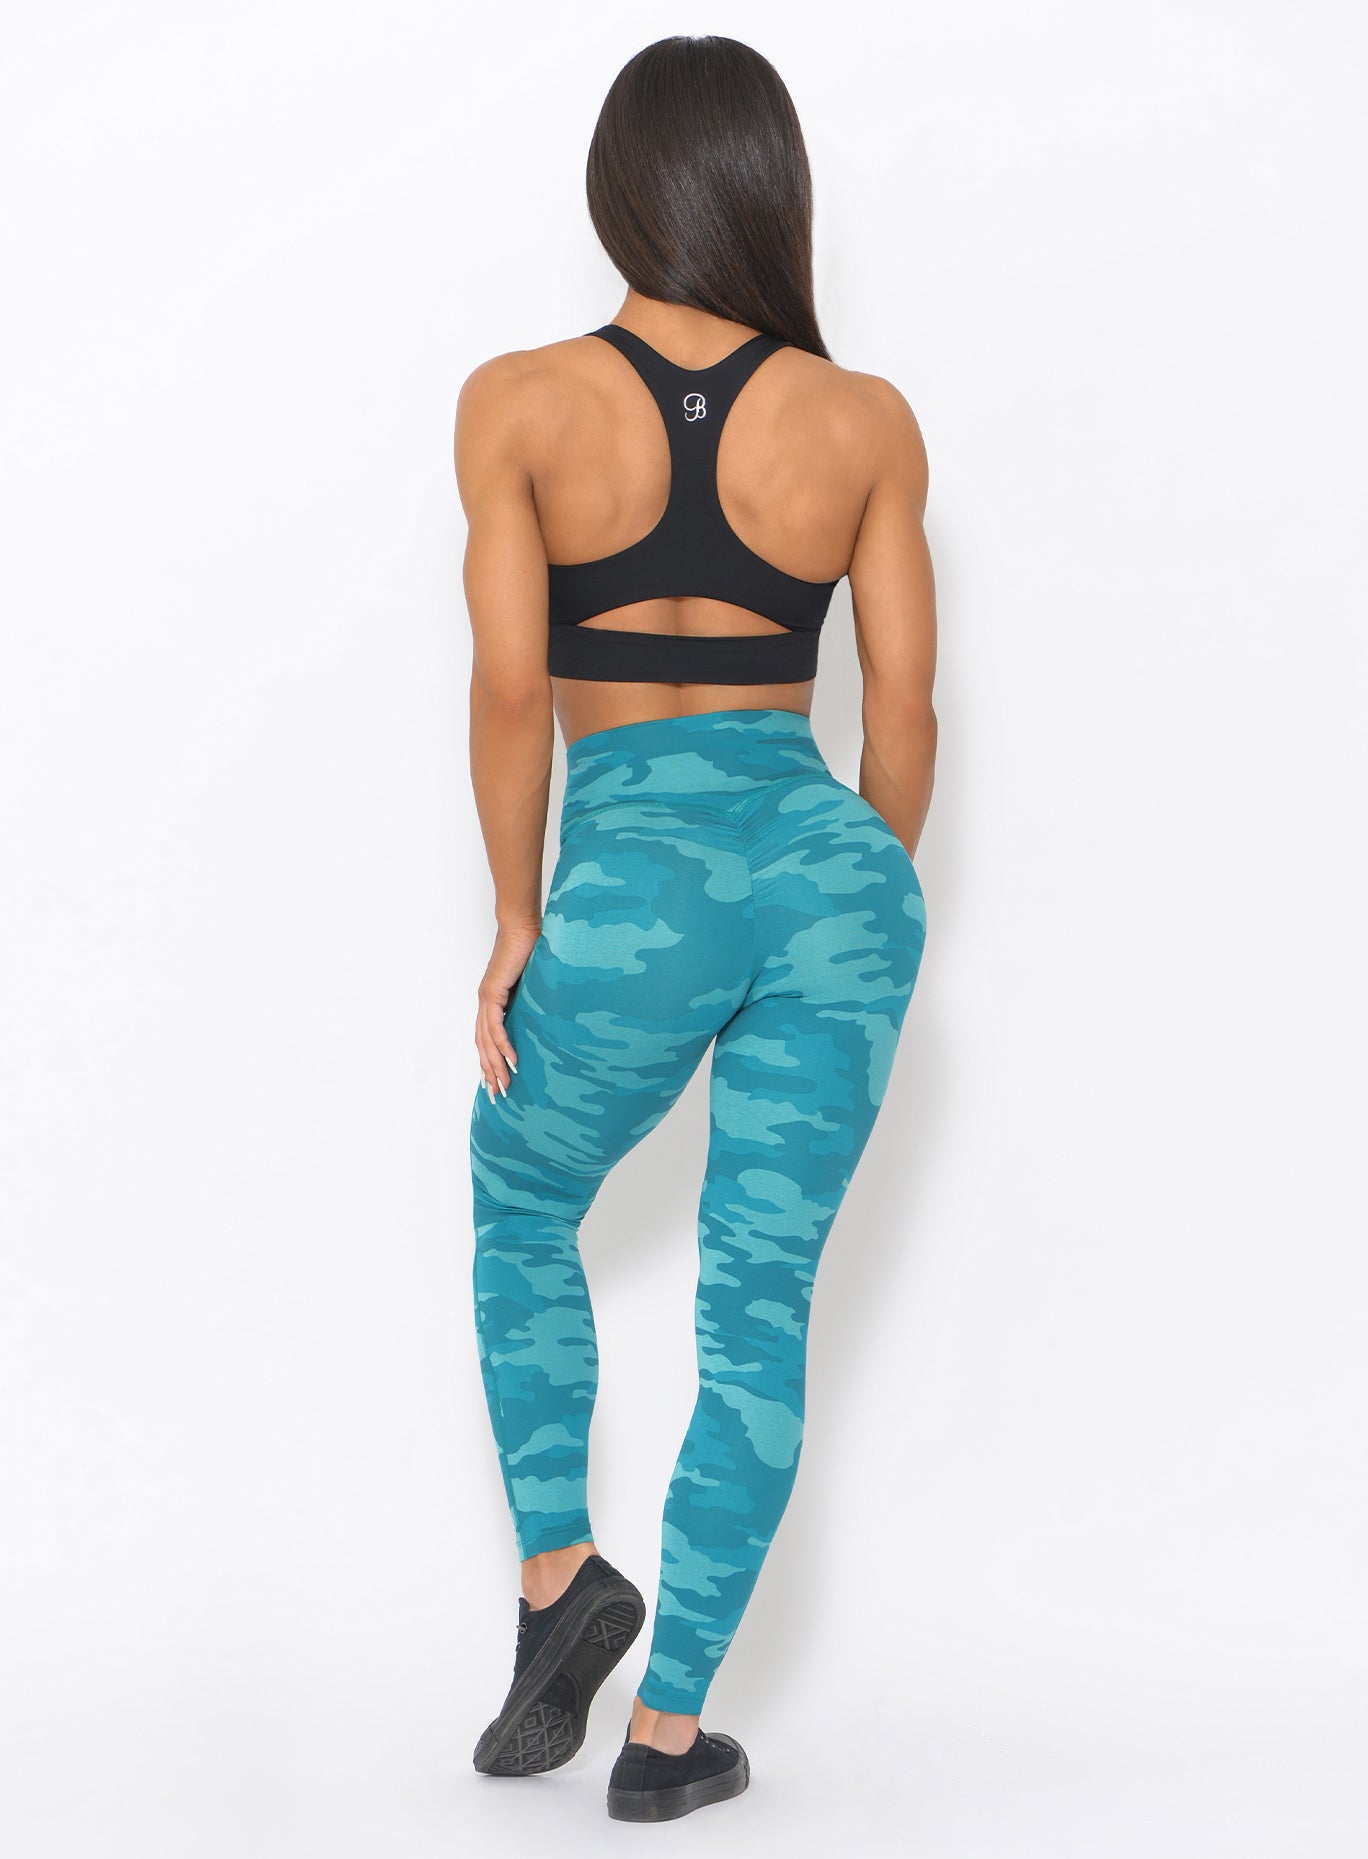 Back view of the model wearing our fit camo leggings in teal color and a black sports bra